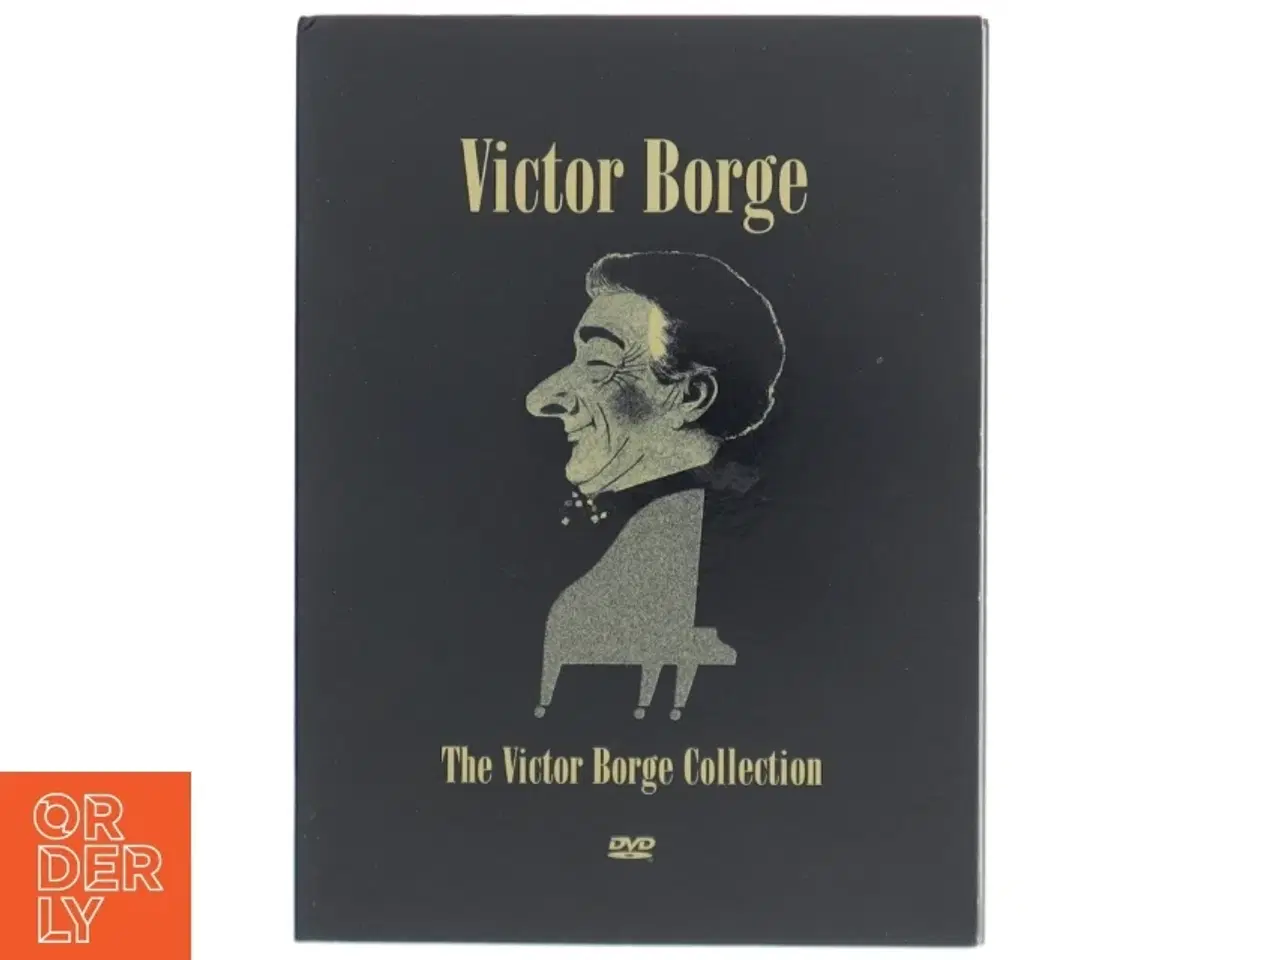 Billede 1 - The Victor Borge Collection